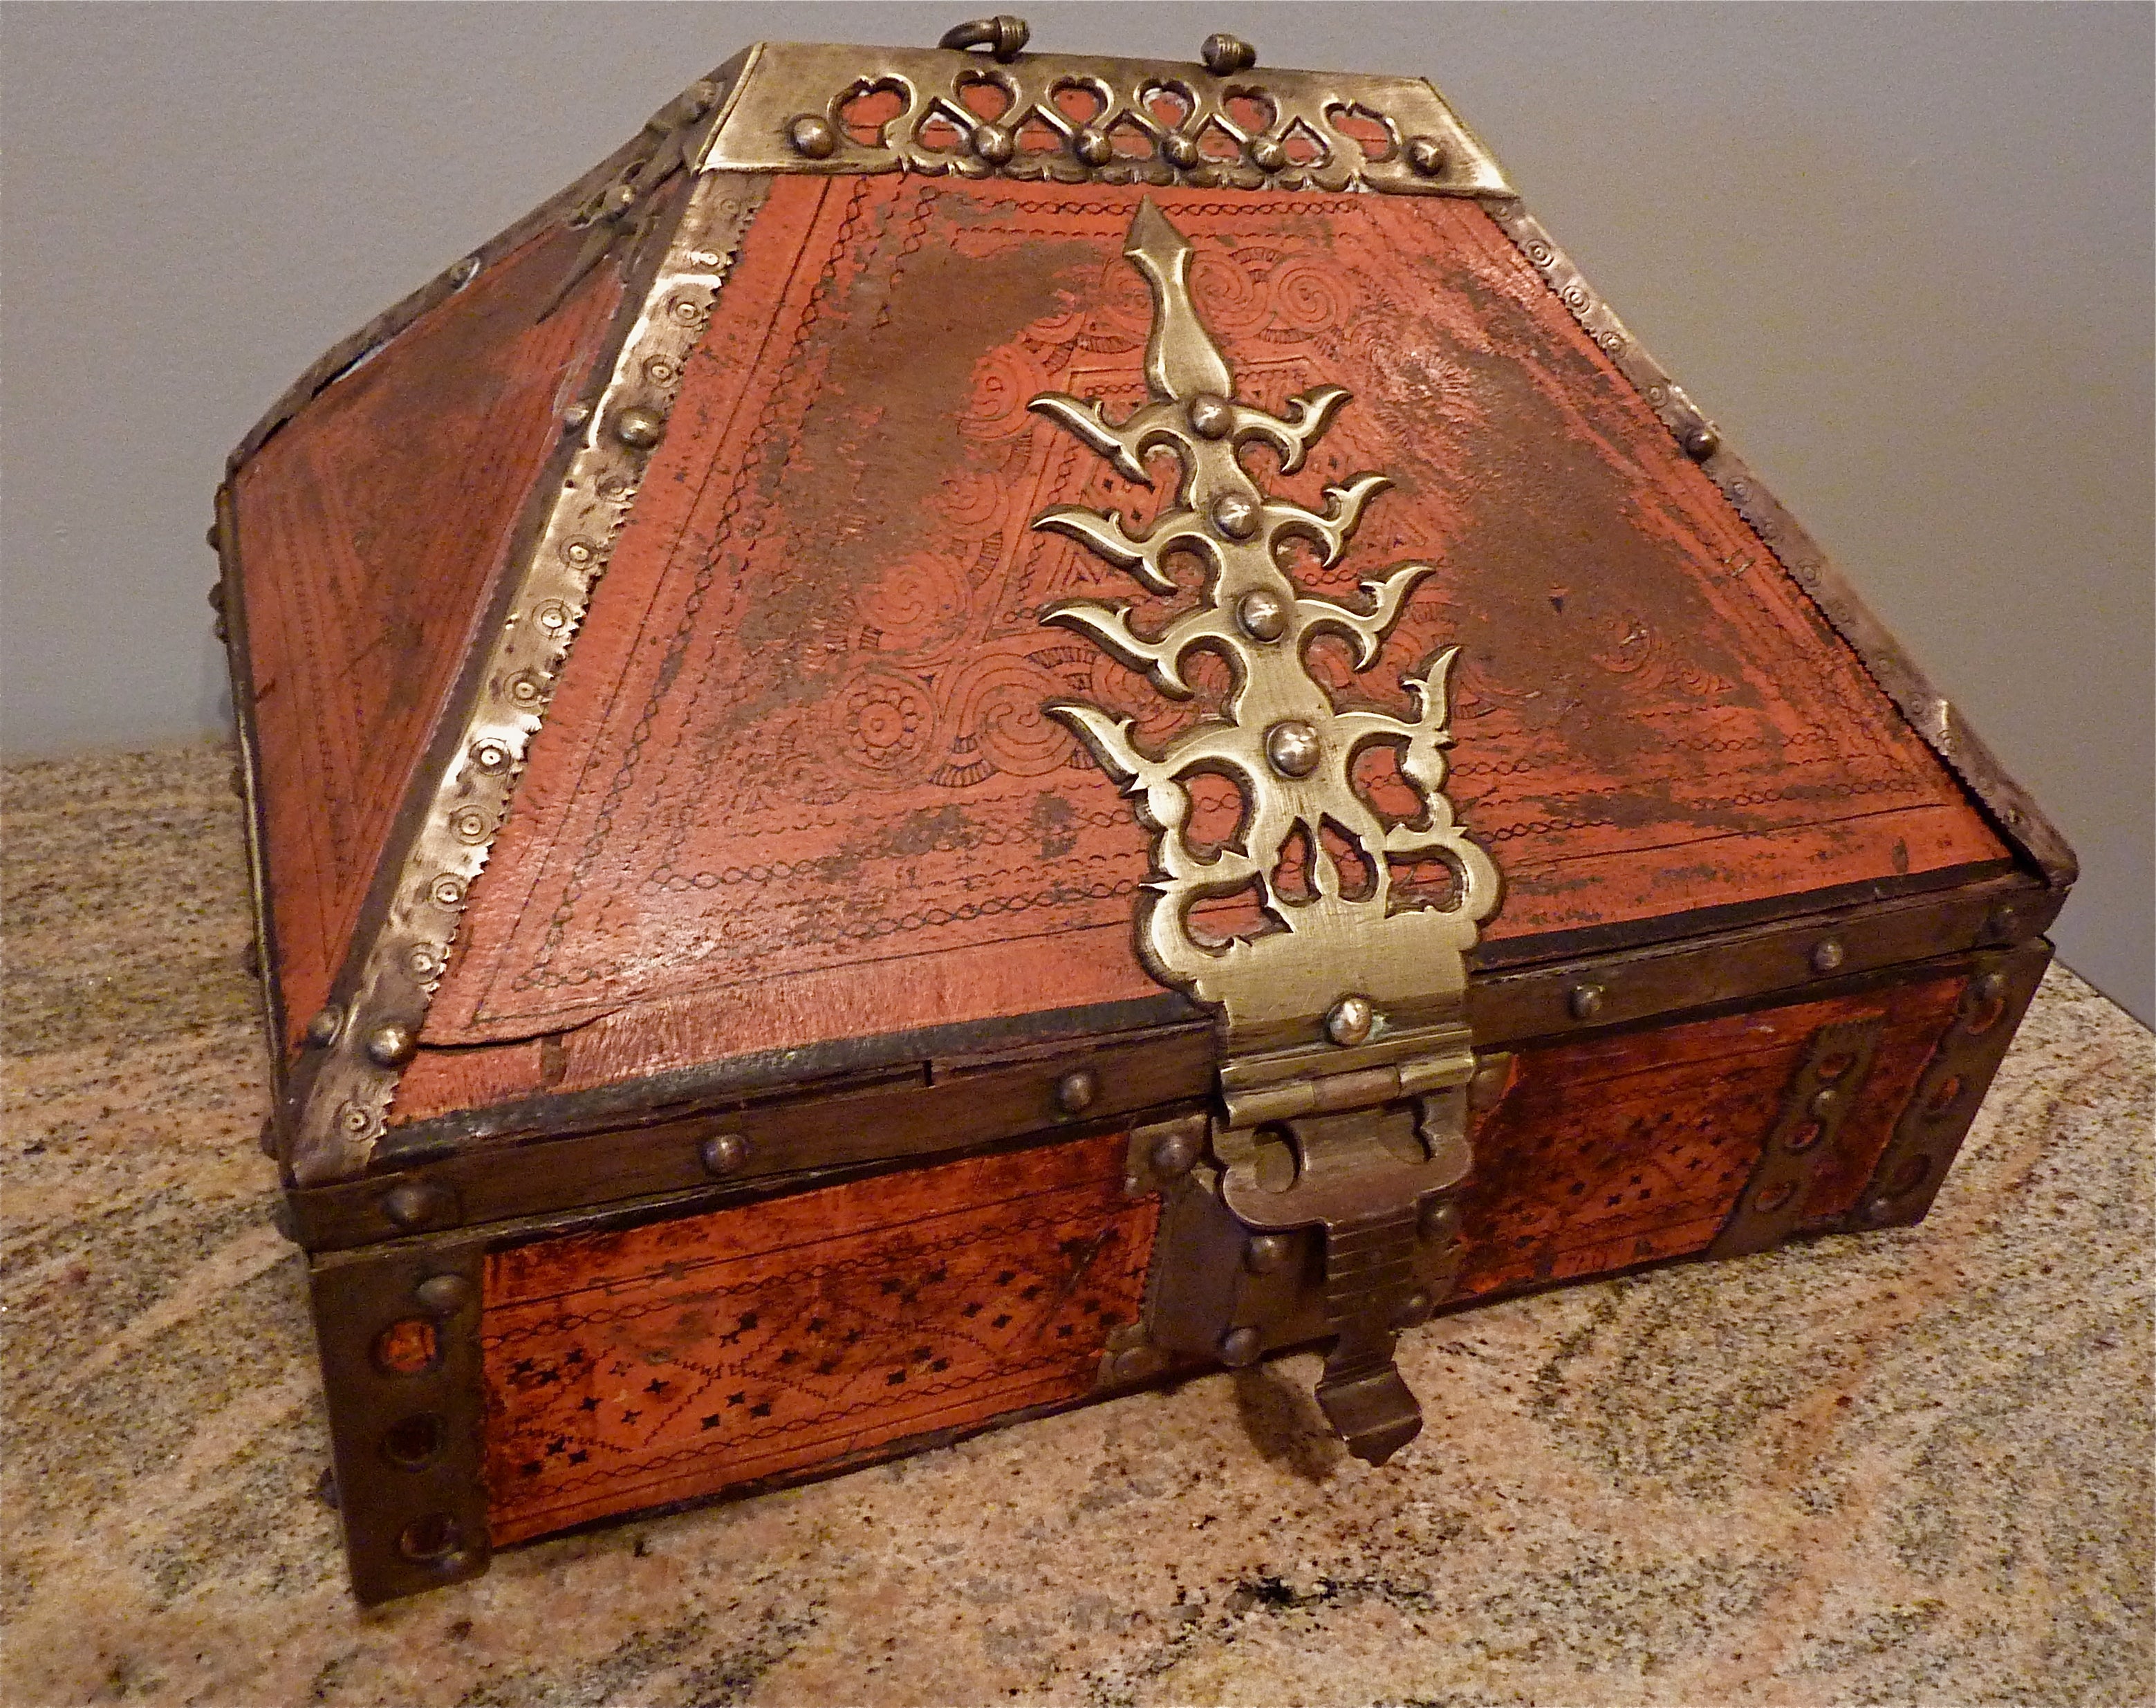 18th Century Brass Mounted and Lacquered  “Marriage”  Box.  